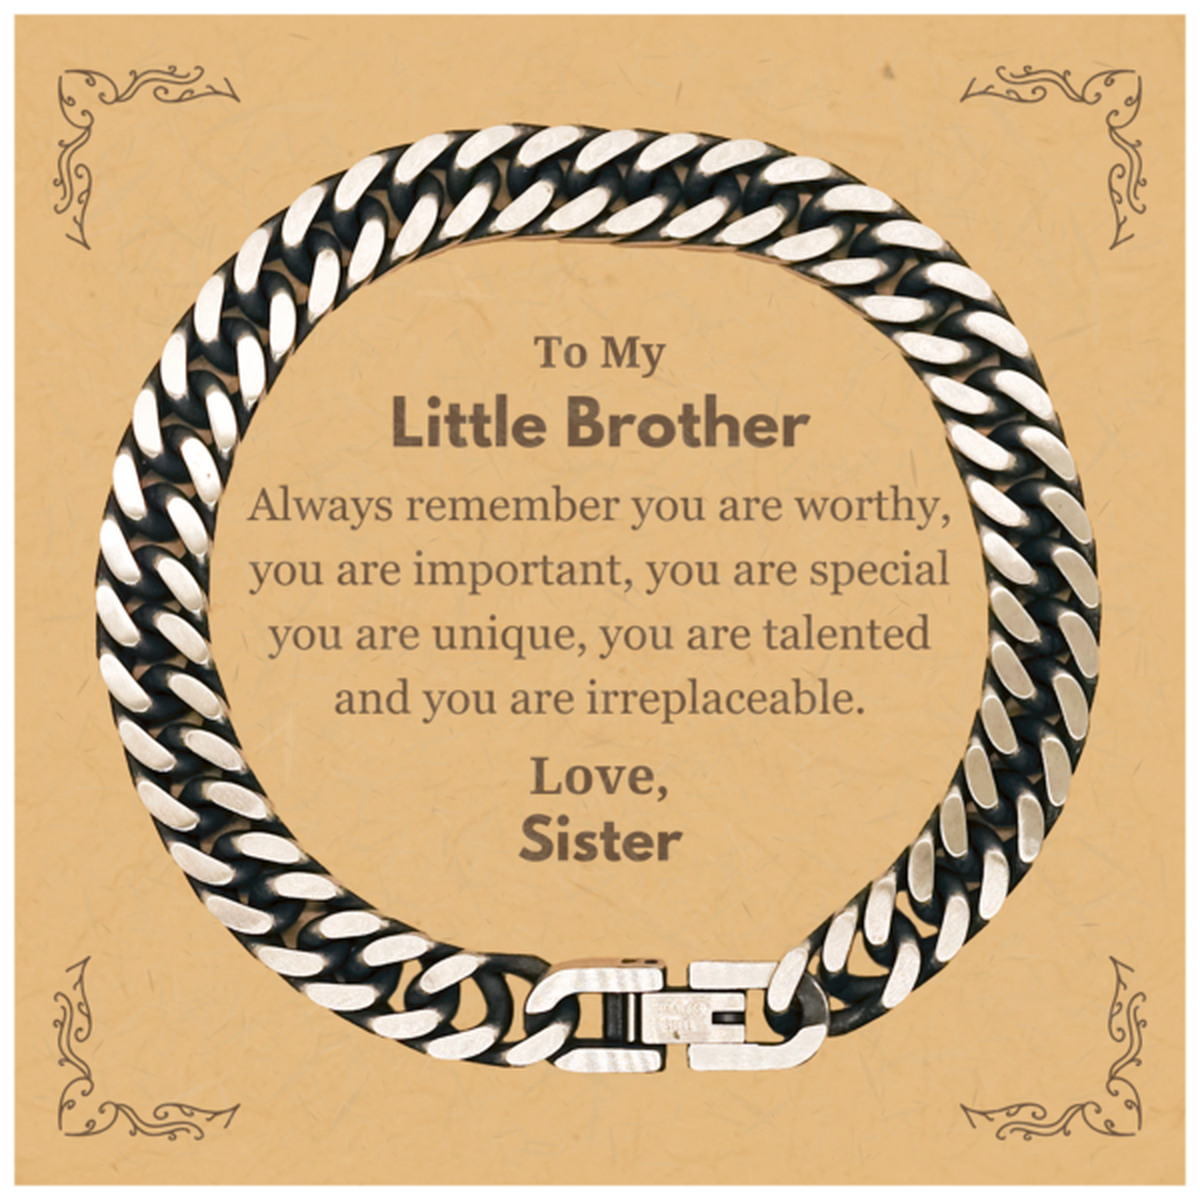 Little Brother Birthday Gifts from Sister, Inspirational Cuban Link Chain Bracelet for Little Brother Christmas Graduation Gifts for Little Brother Always remember you are worthy, you are important. Love, Sister